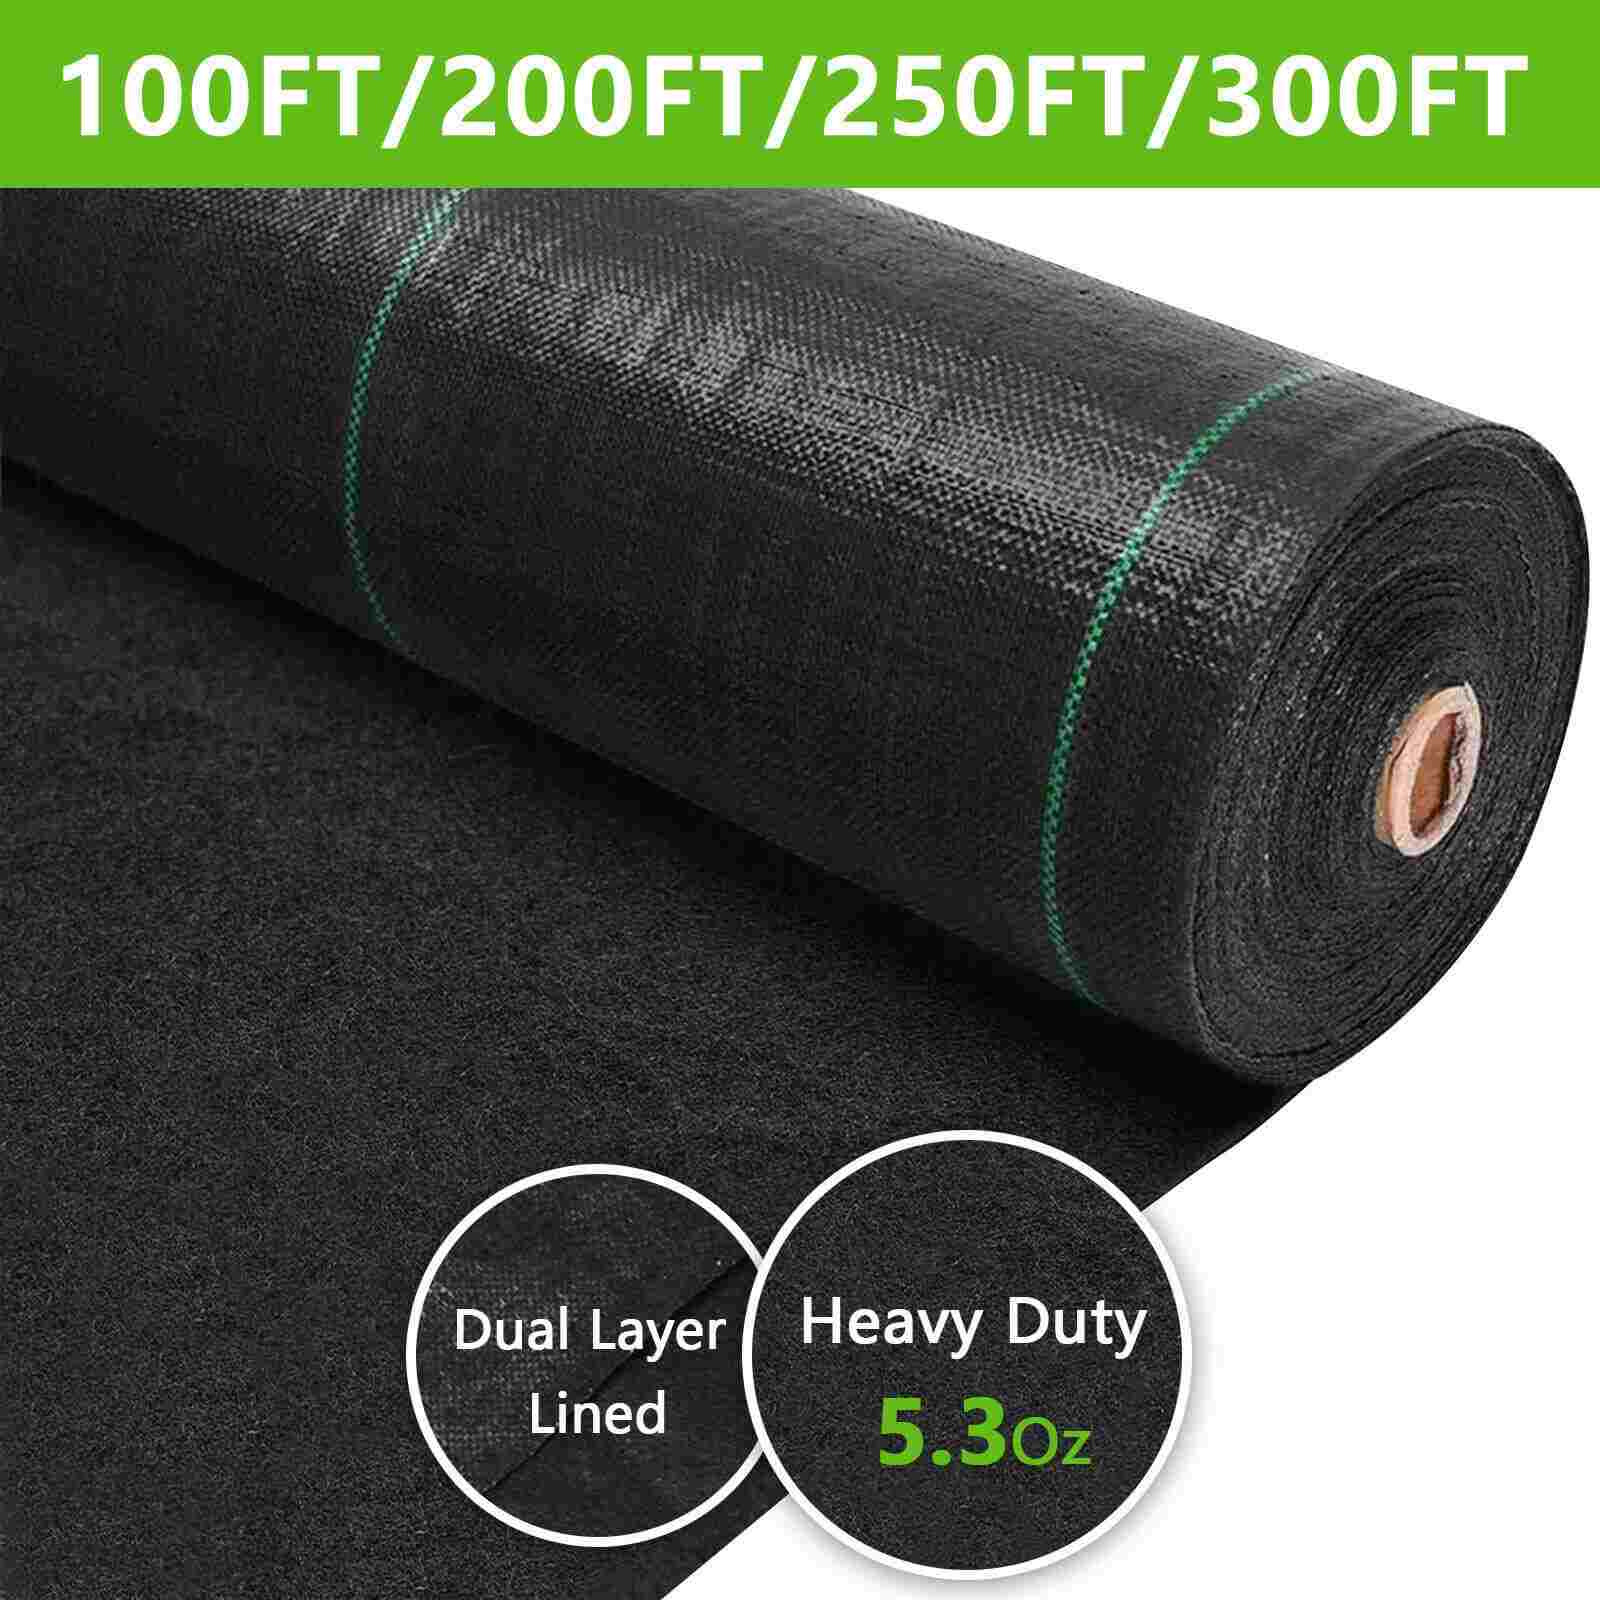 Size of 5.3oz PP Fabric Weed Prevention Cloth Garden Ground Cover